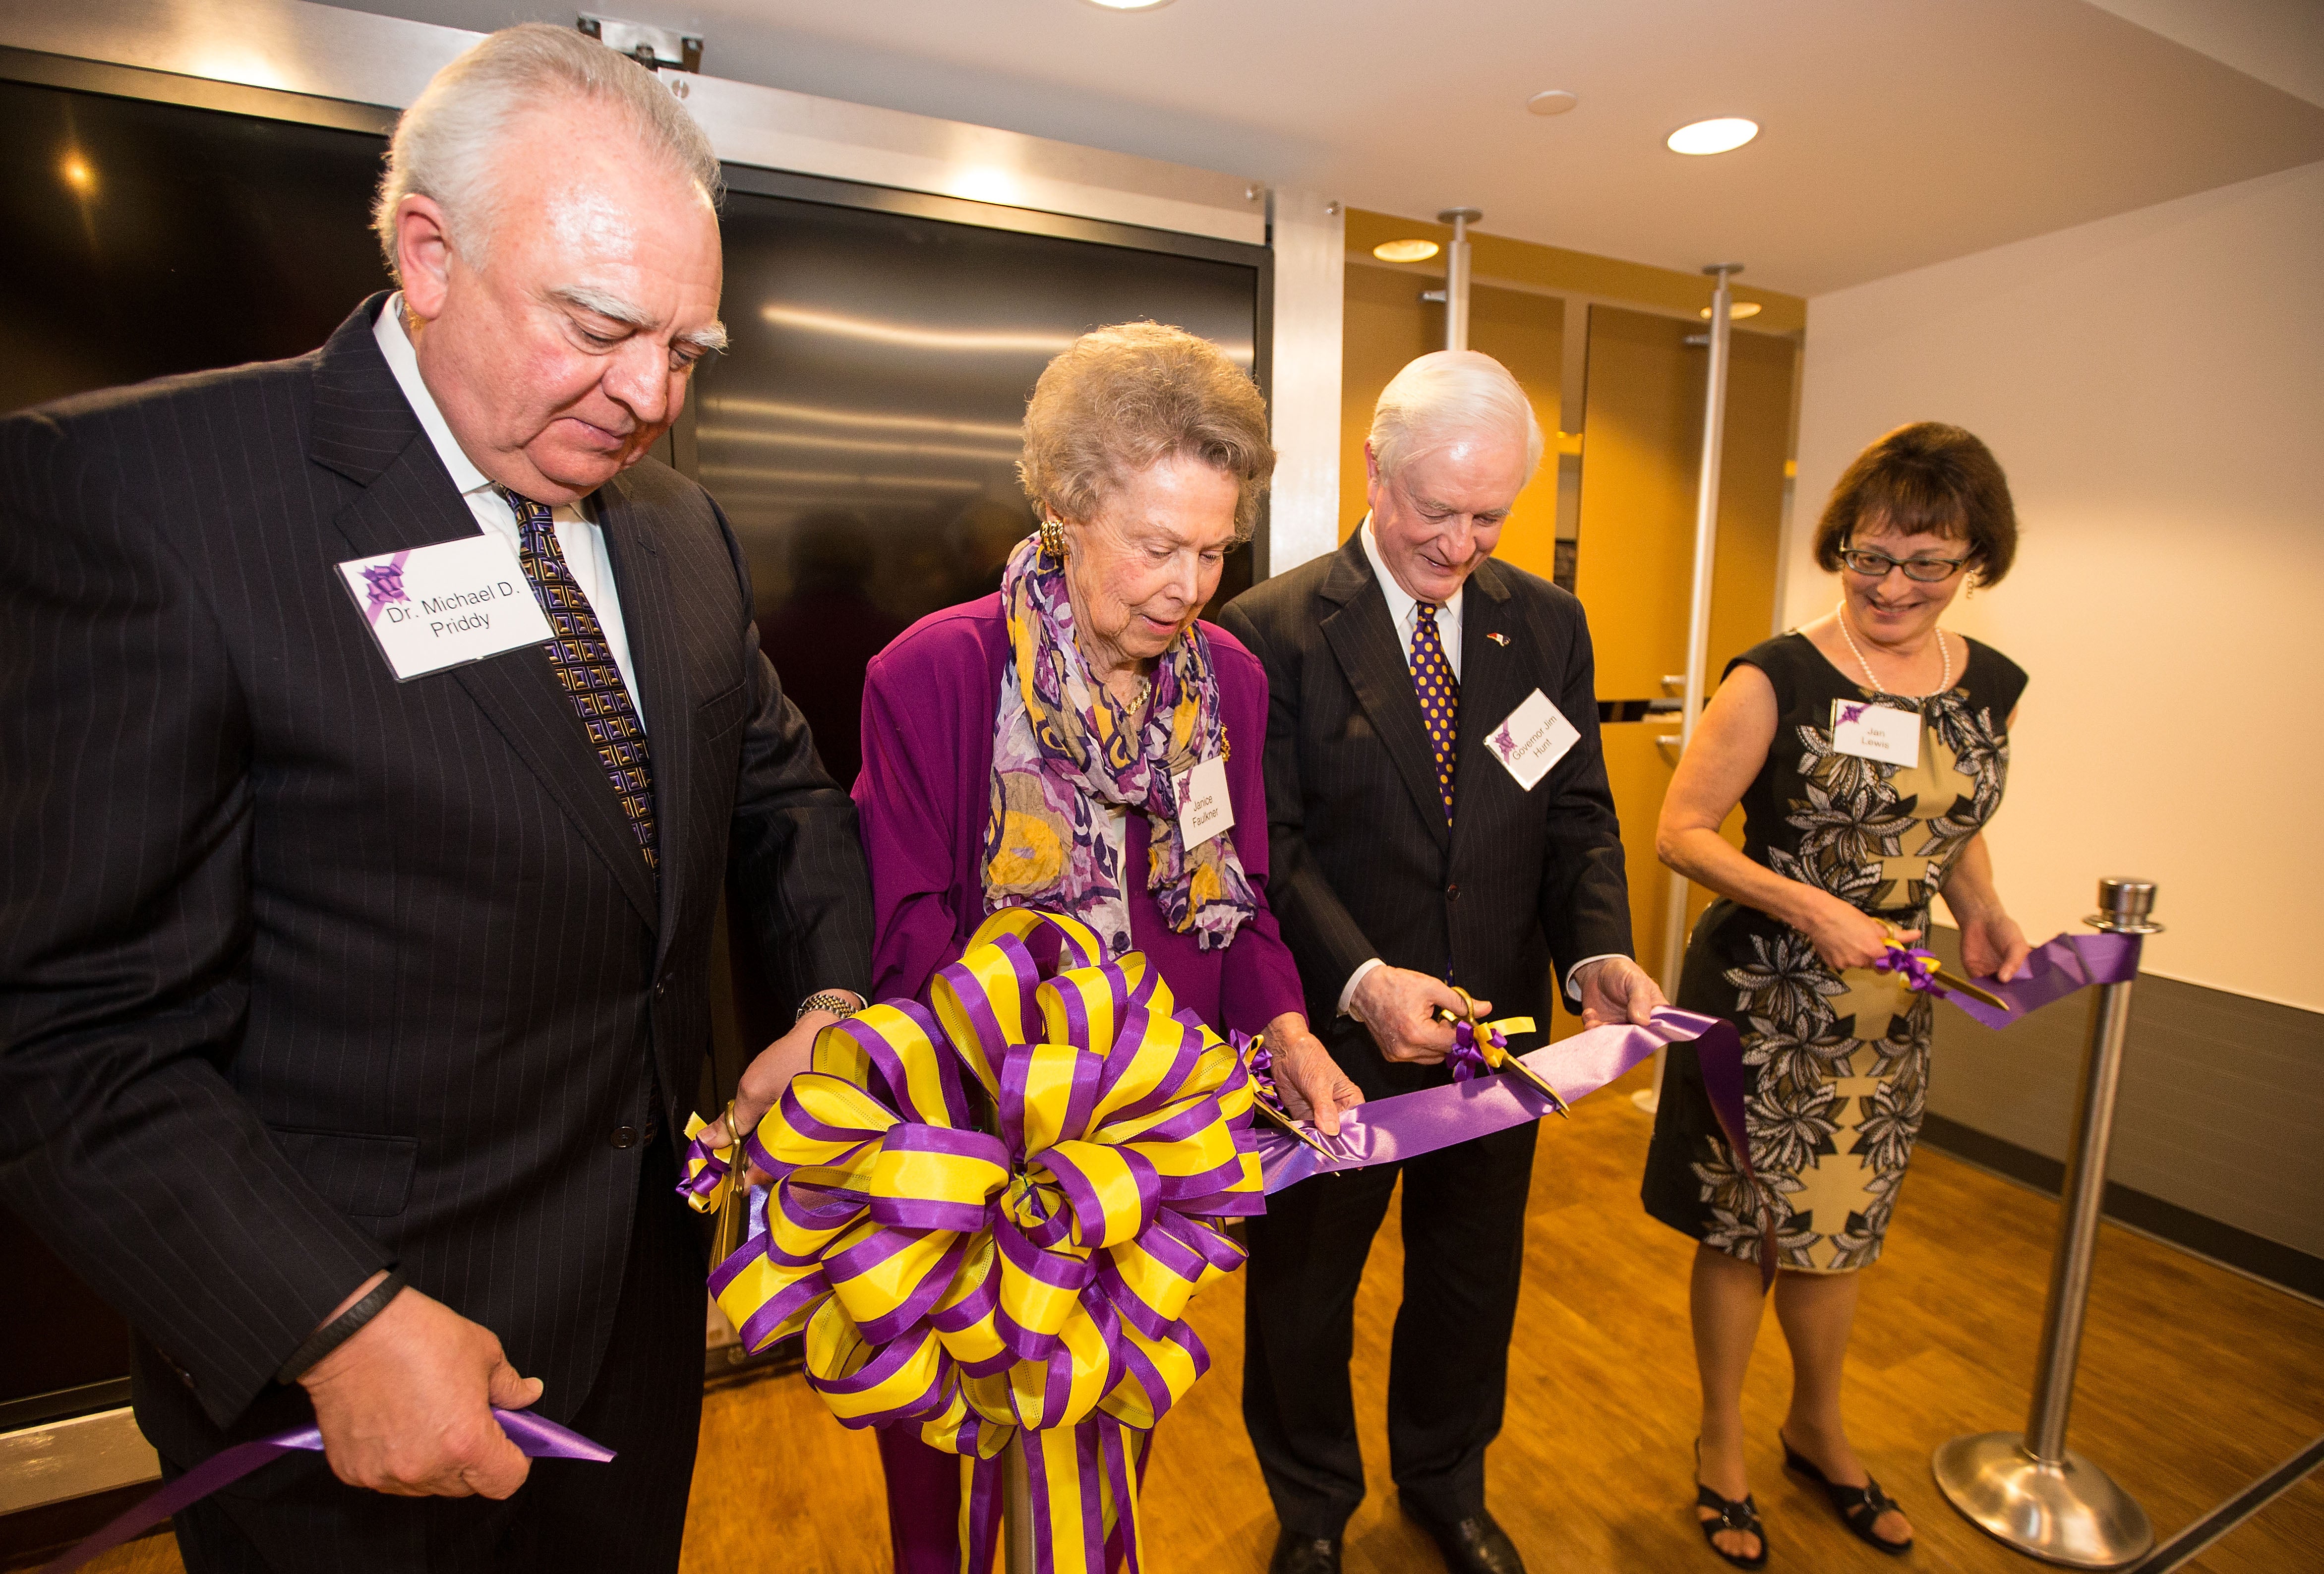 Janice Hardison Faulkner at the ribbon cutting for the Faulkner Gallery in 2014 with Michael Priddy, former state governor Jim Hunt and Jan Lewis, director of Joyner Library. Photo by Cliff Hollis.
